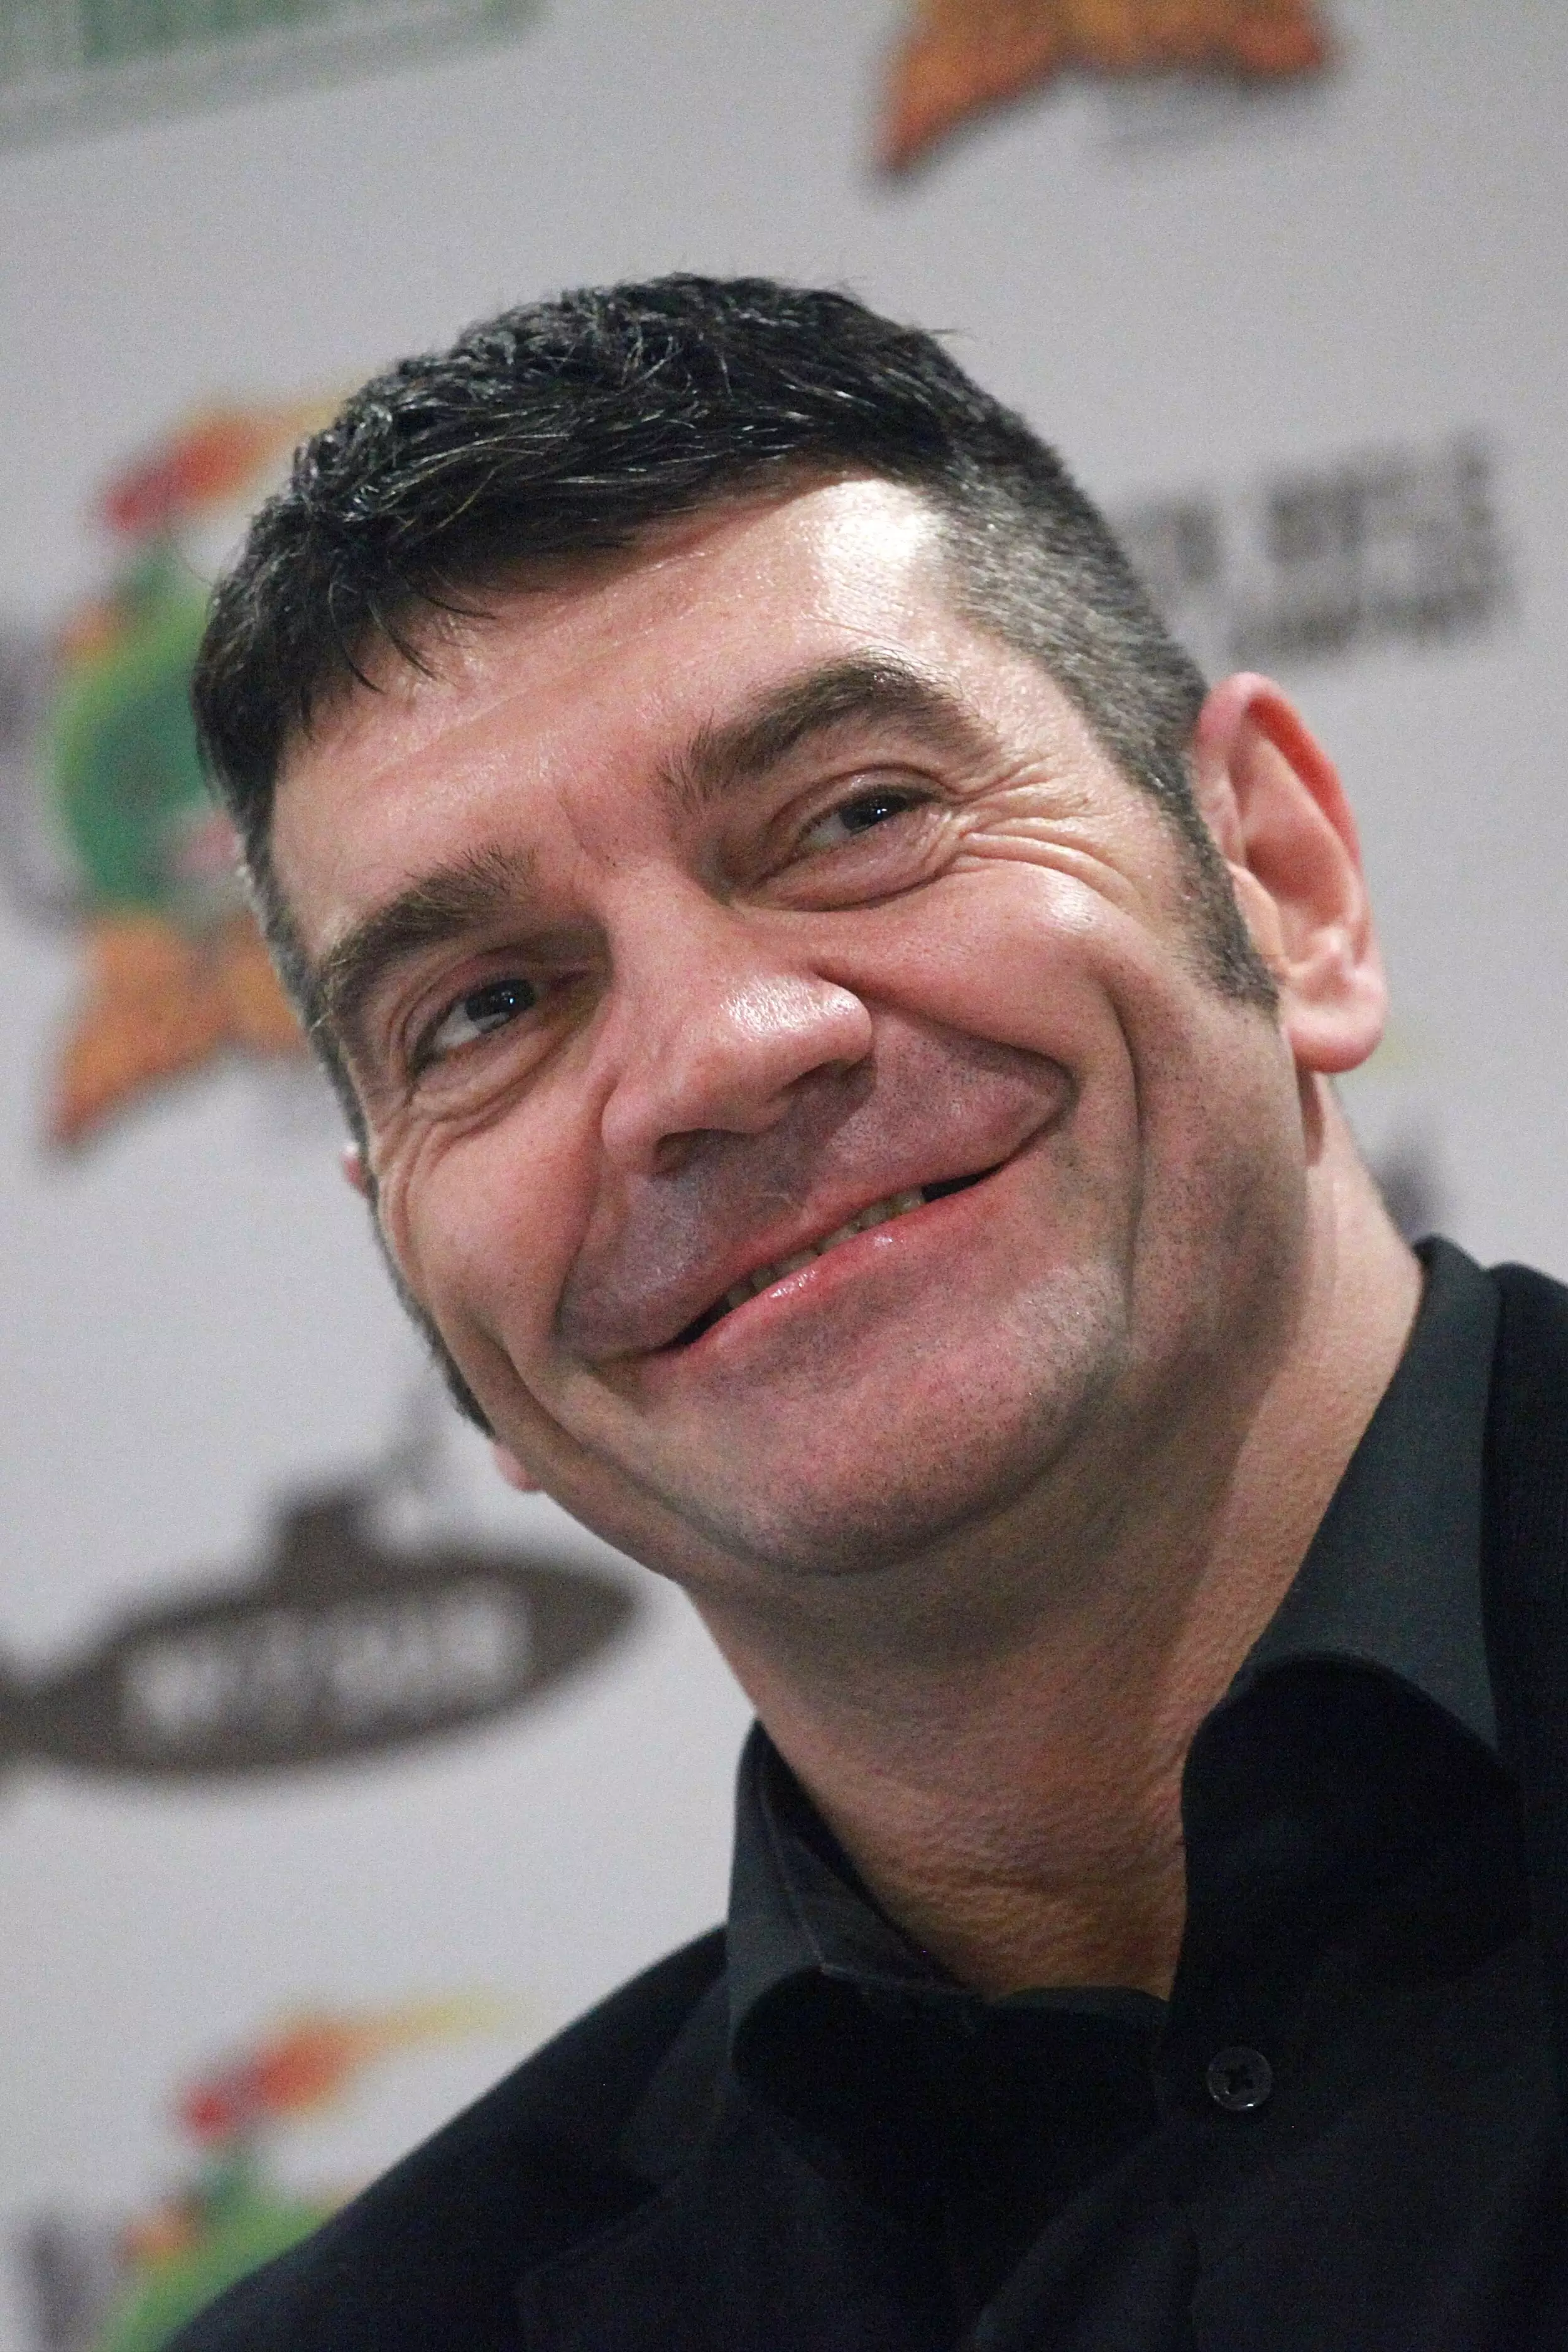 Spencer Wilding: The Most Famous Actor You've Never Heard Of.